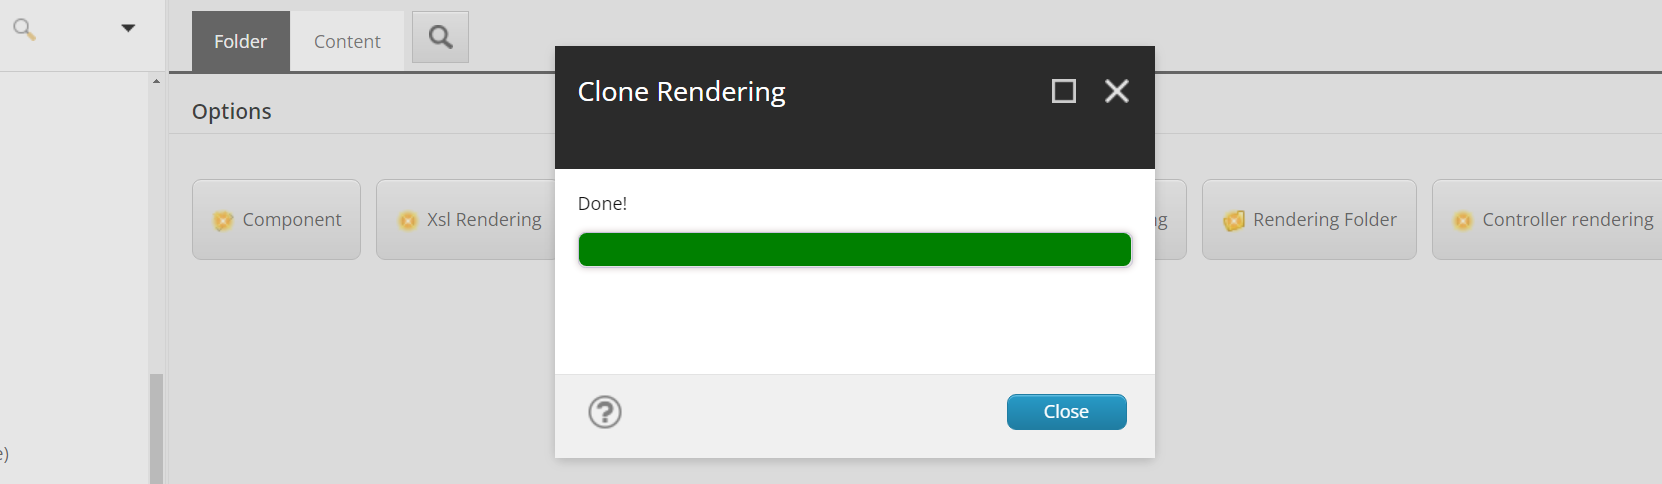 Cloned rendering in Sitecore complete.